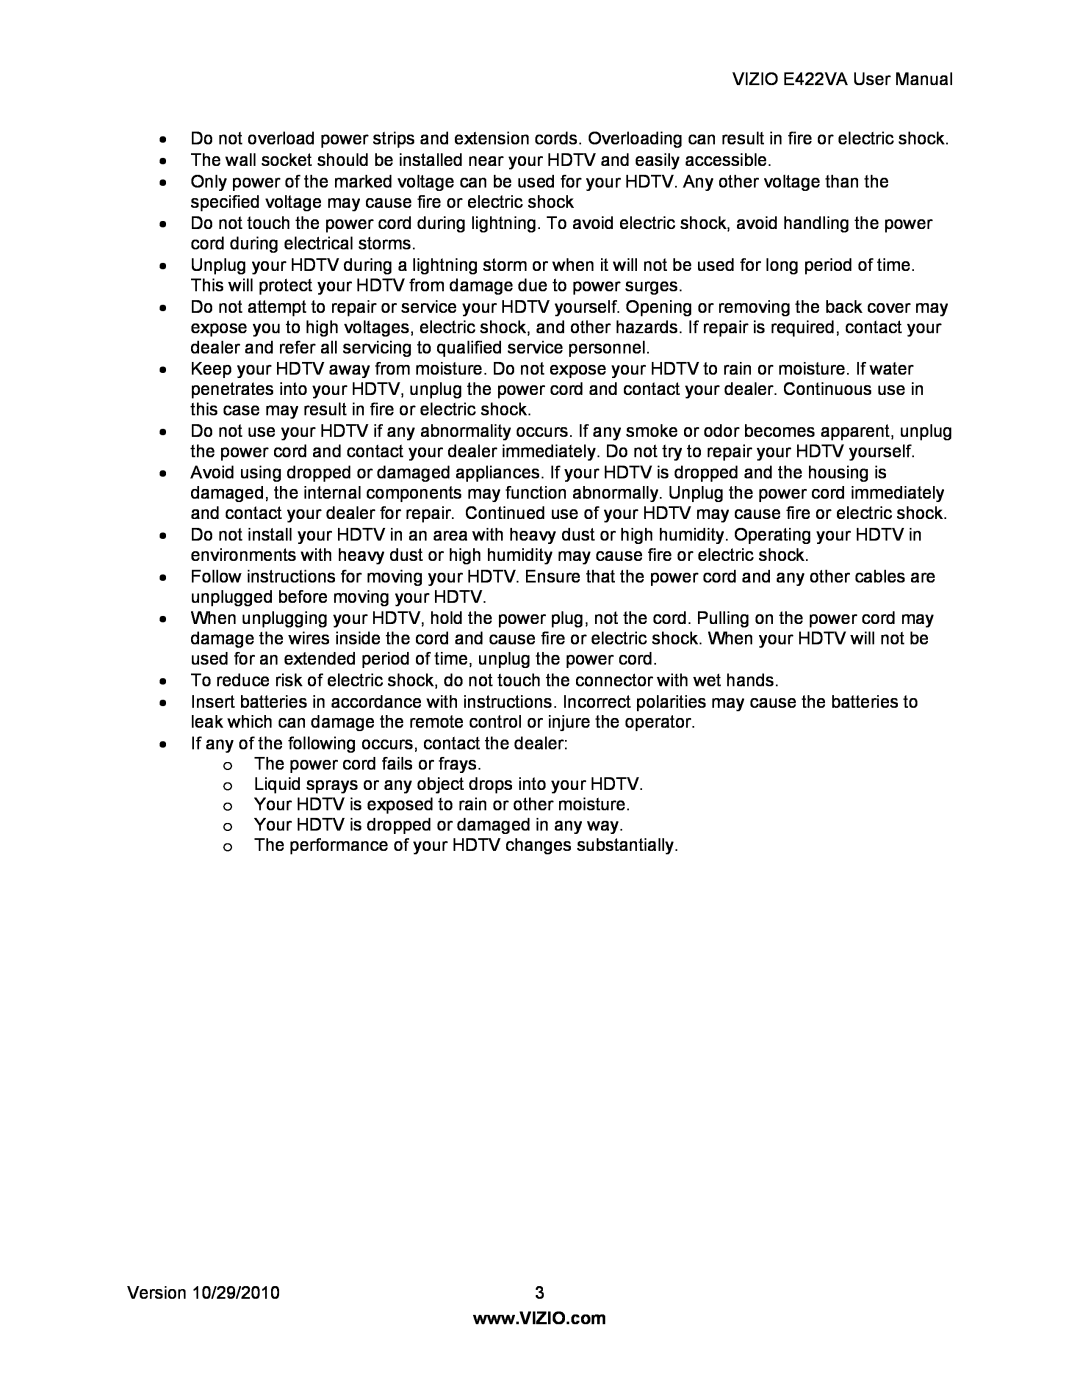 Xerox VIZIO E422VA User Manual, If any of the following occurs, contact the dealer, o The power cord fails or frays 